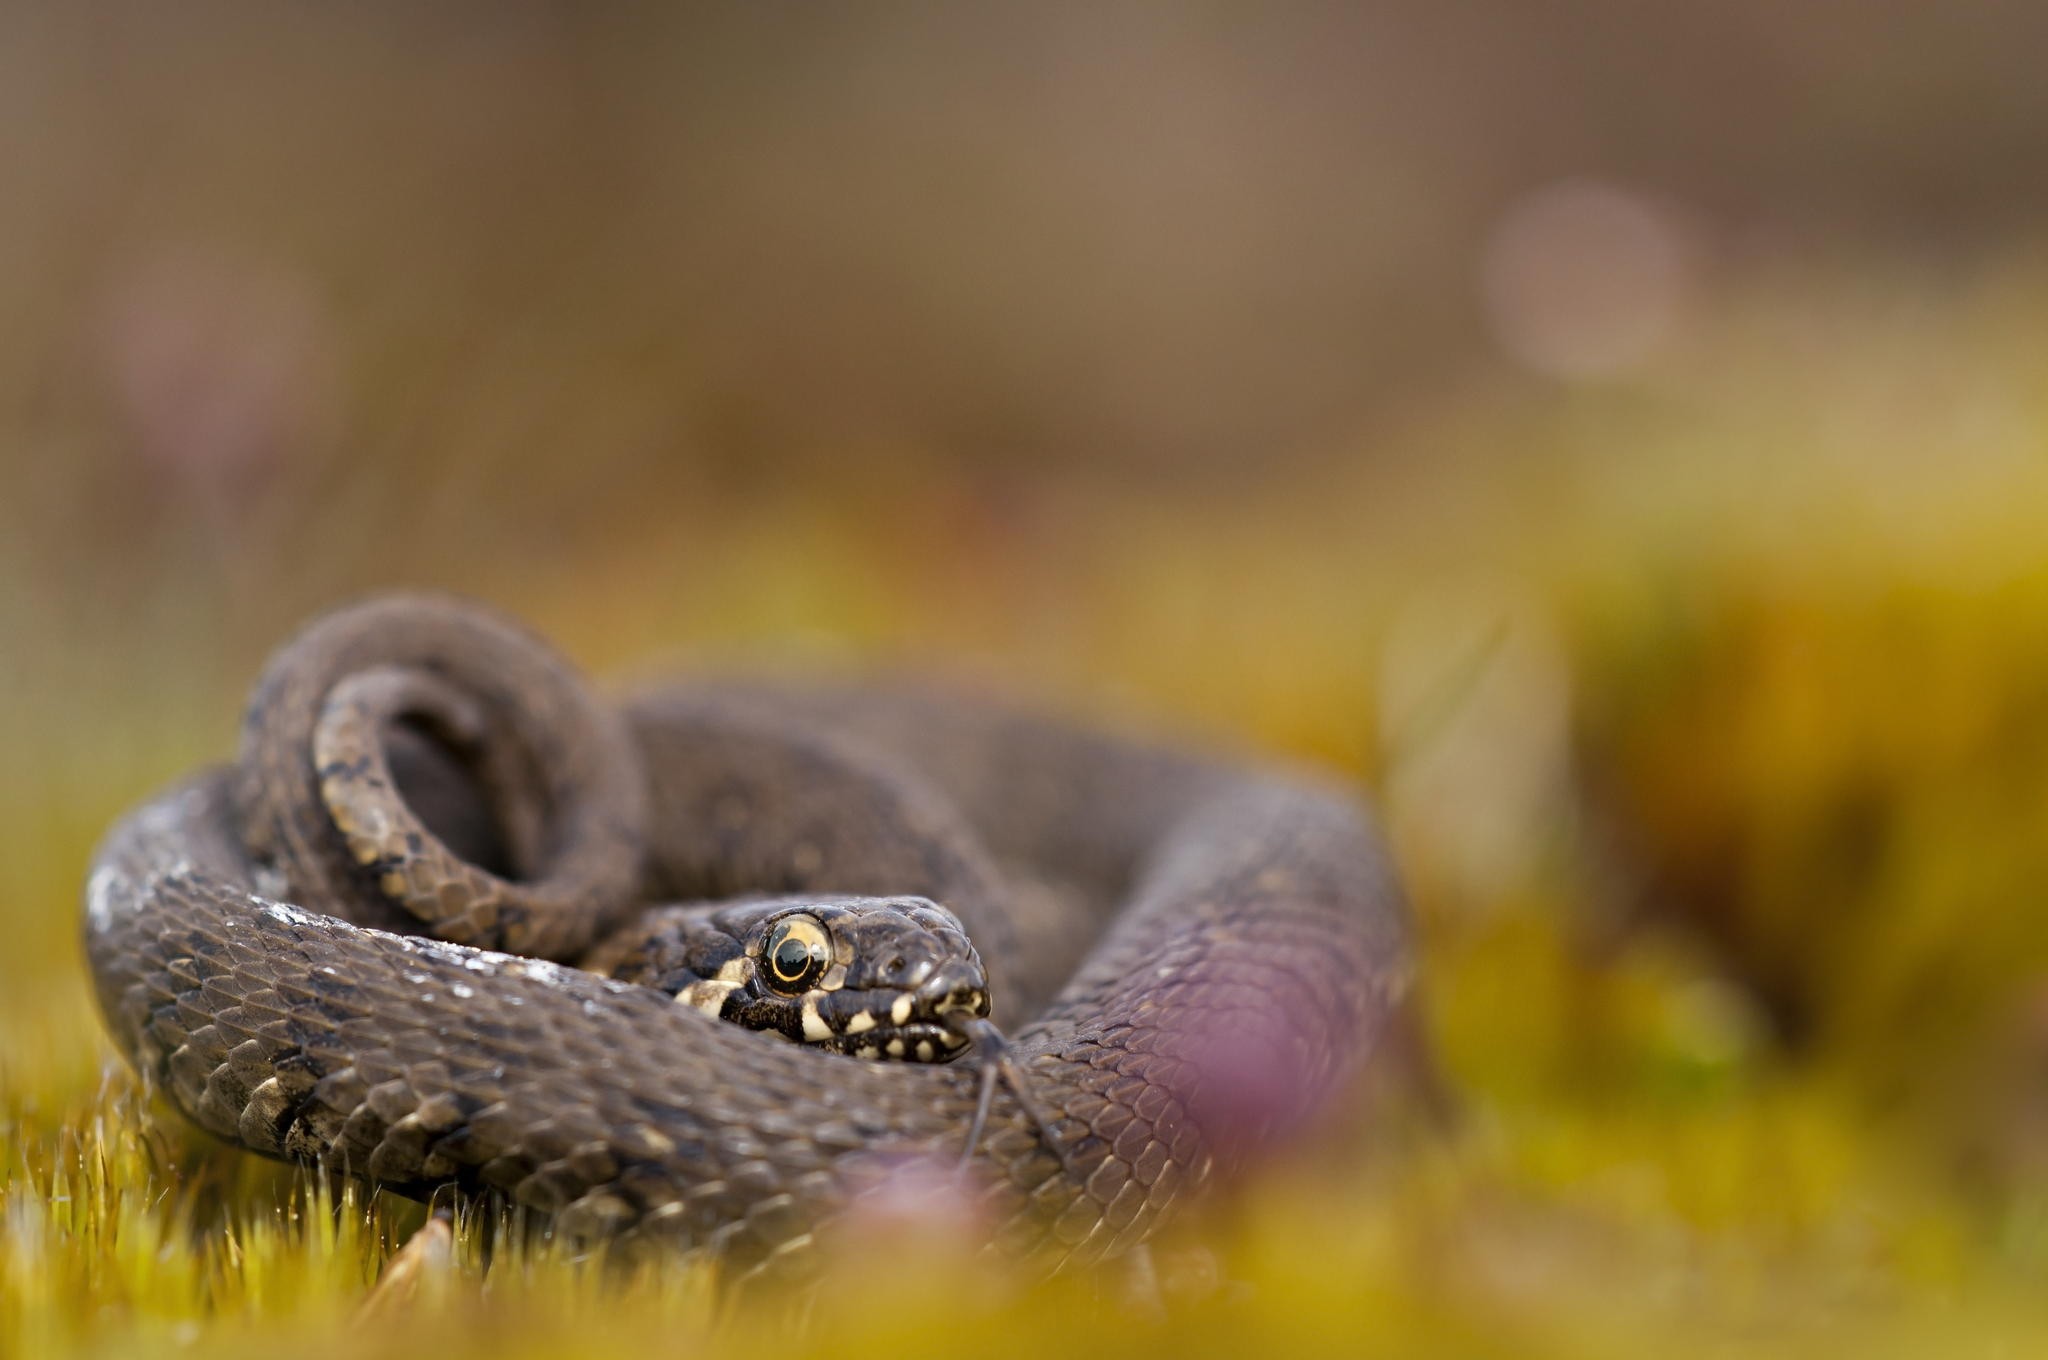 General 2048x1360 photography nature macro snake depth of field grass rest bokeh reptiles animals